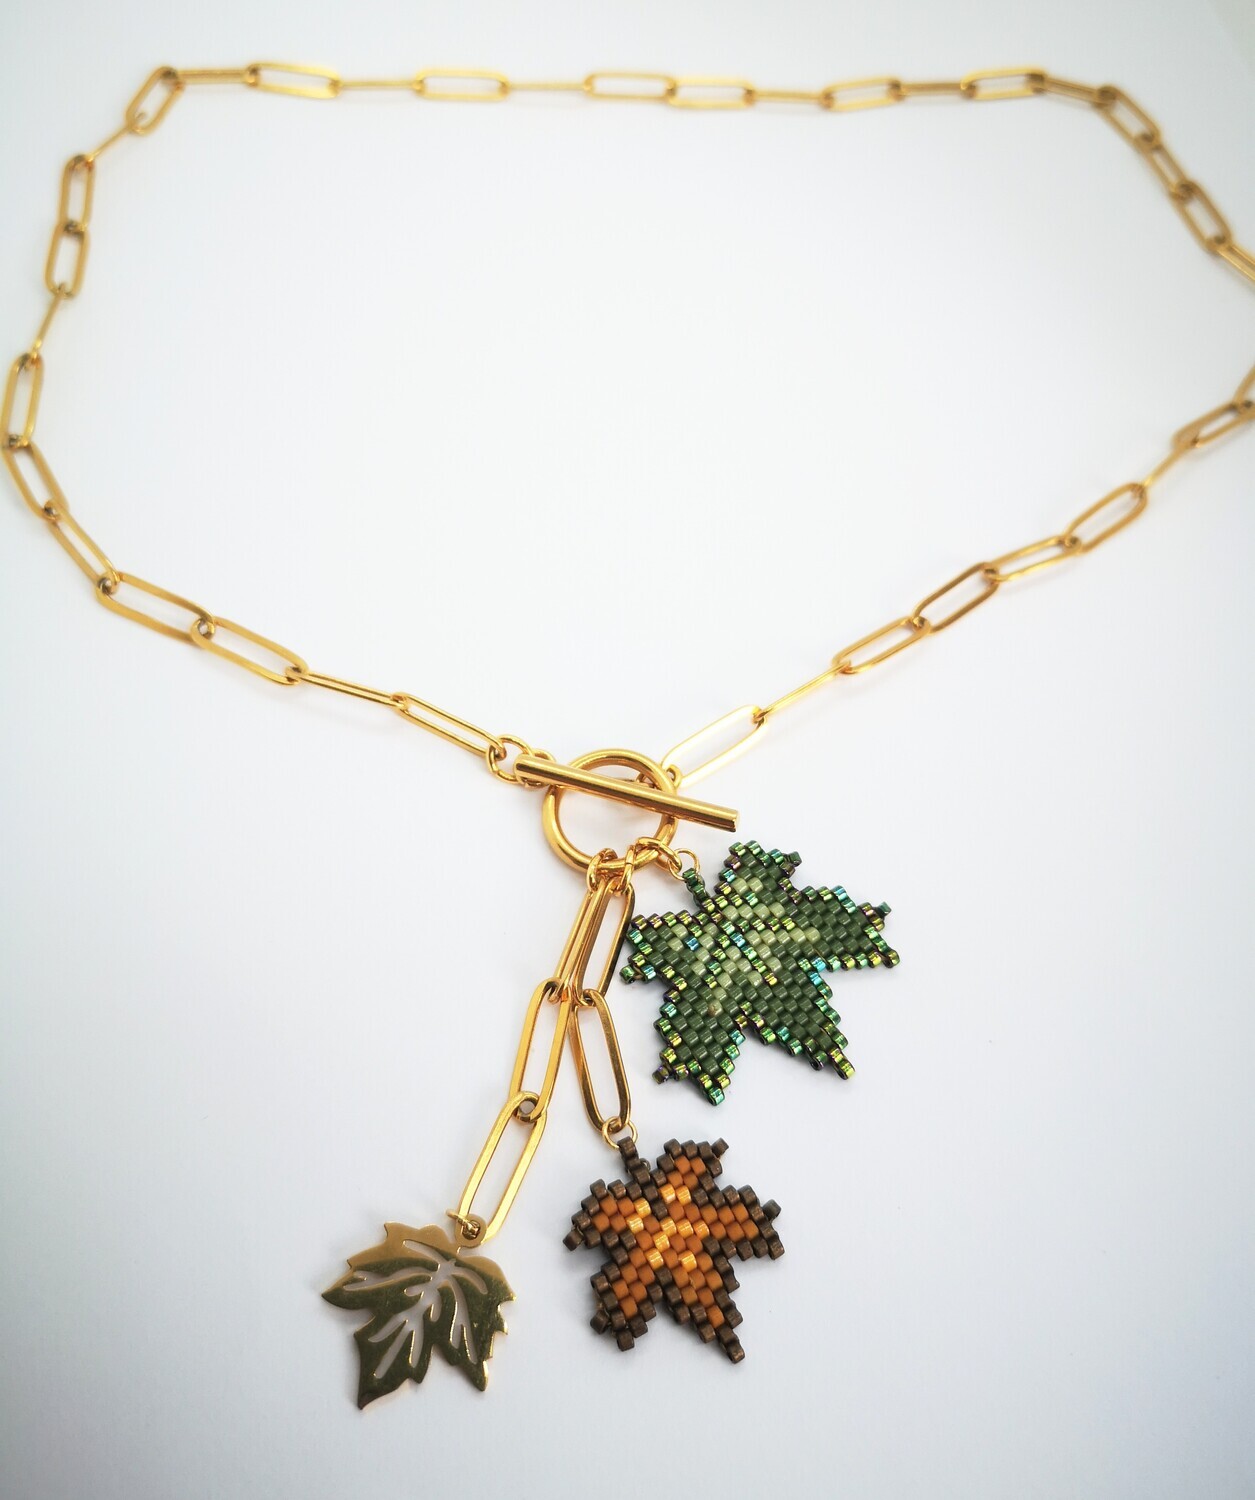 "Leaves " necklace